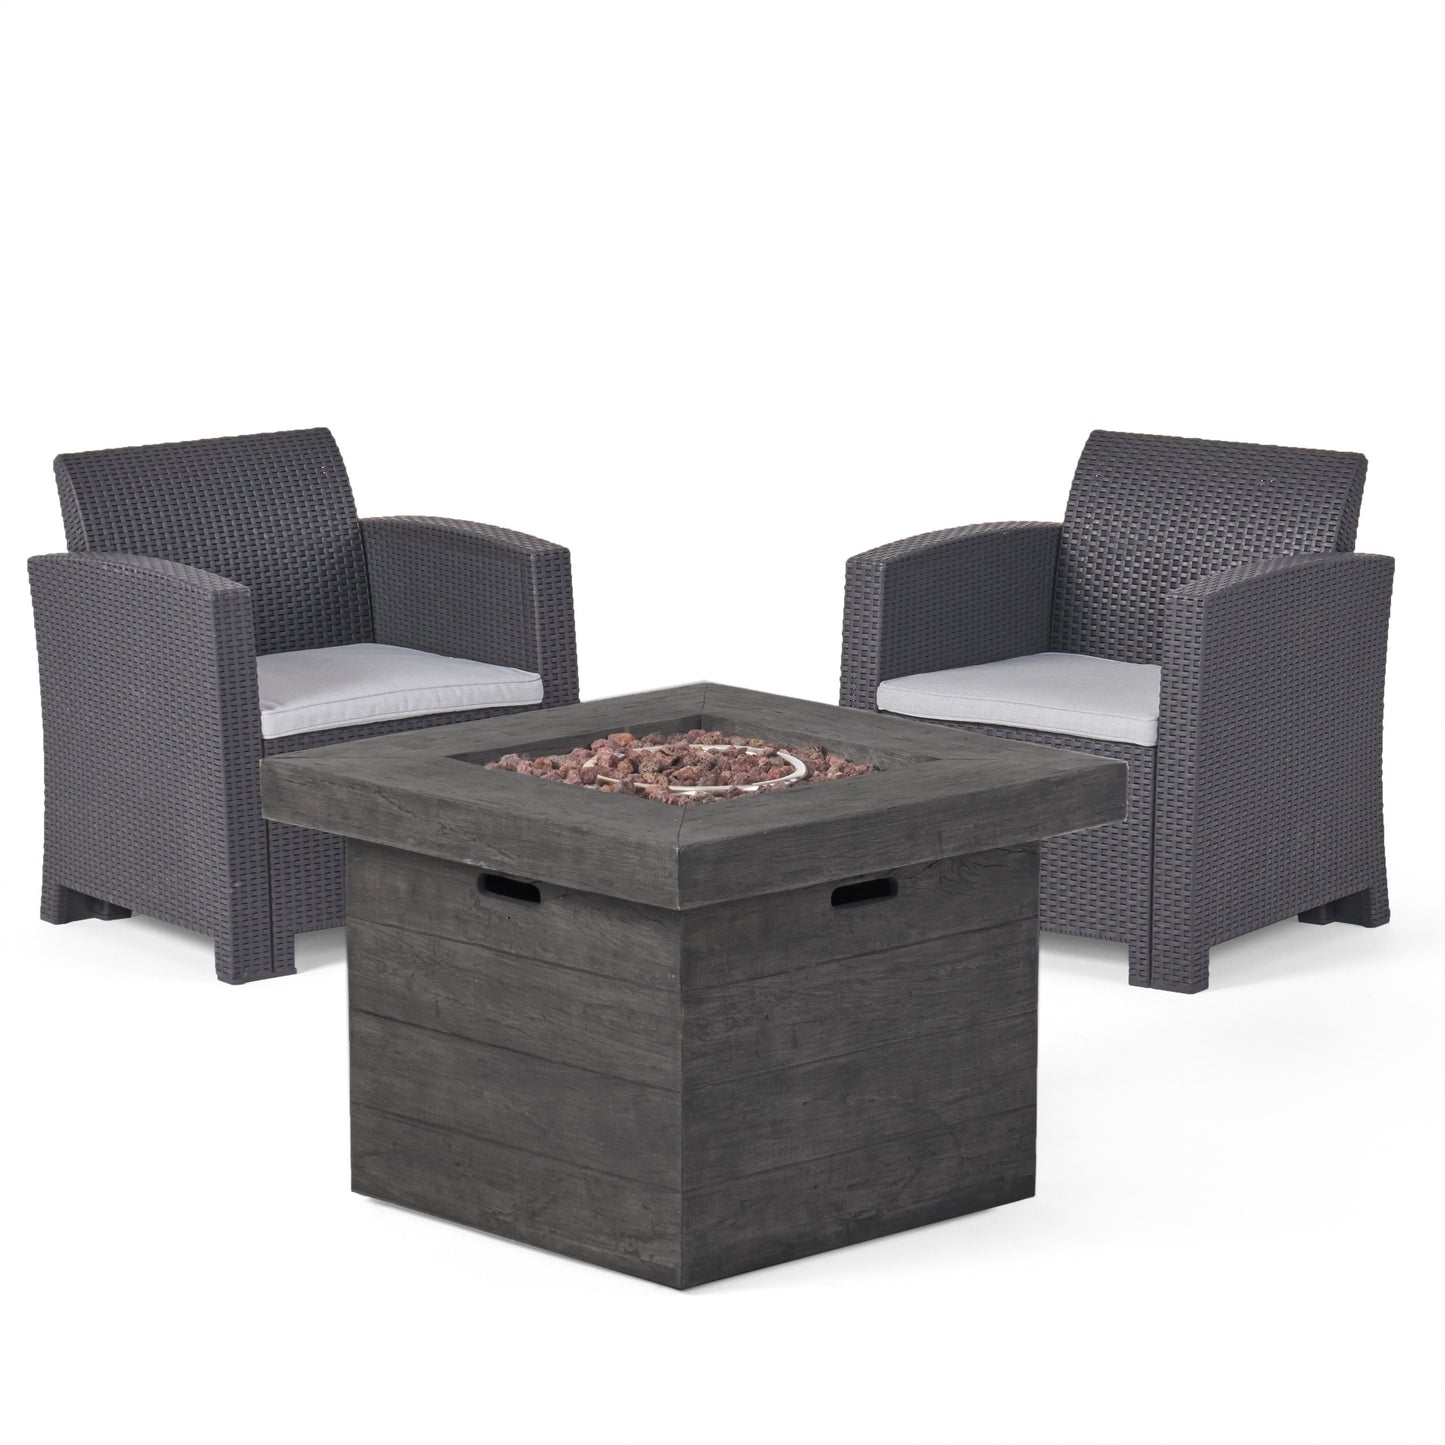 Ollie Outdoor 2-Seater Wicker Print Club Chair Chat Set with Fire Pit